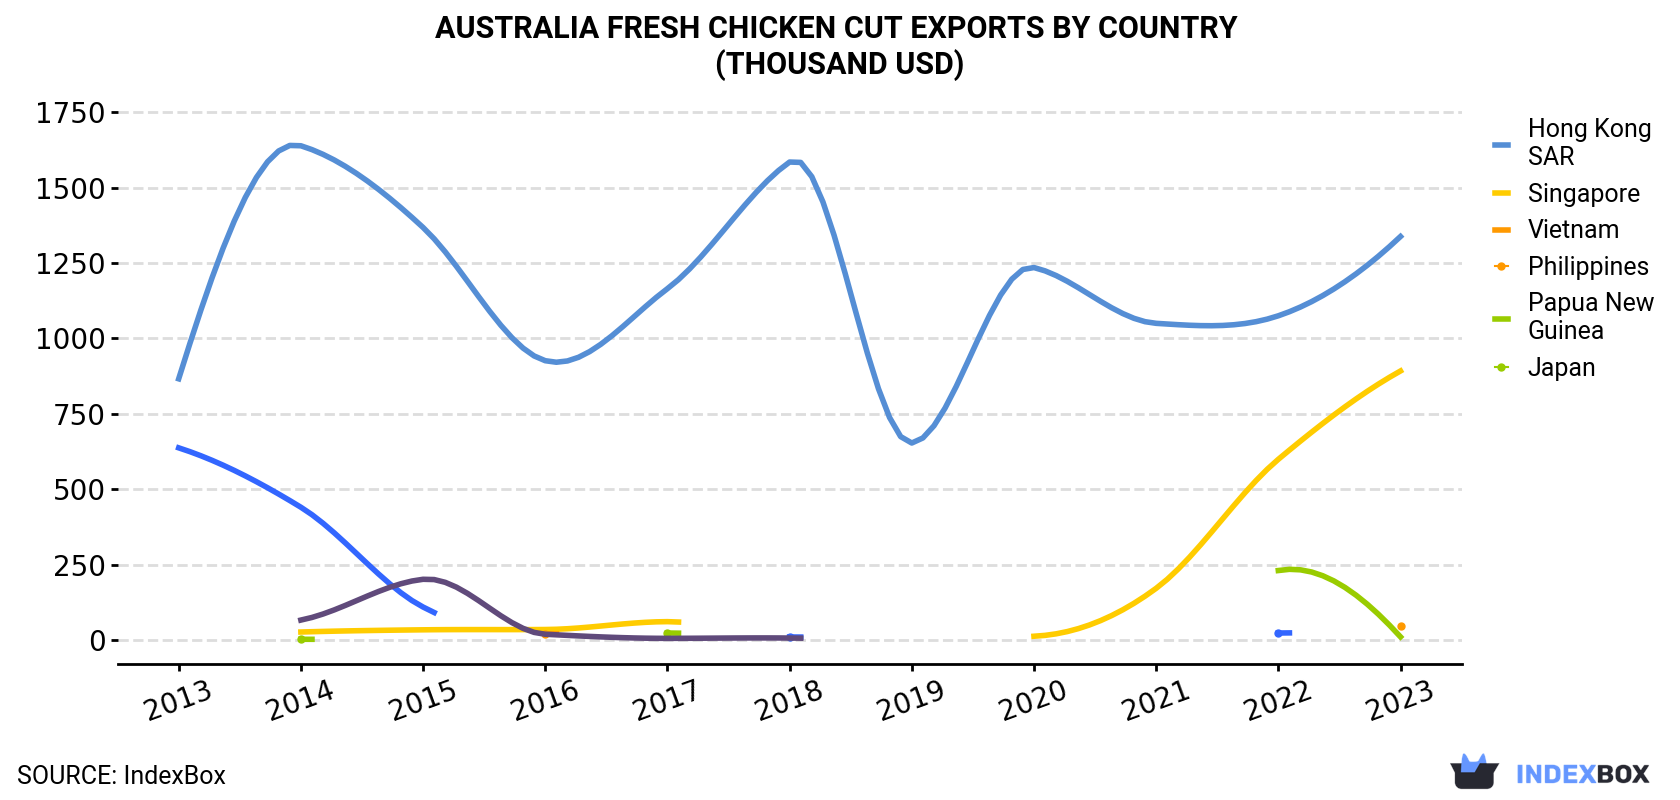 Australia Fresh Chicken Cut Exports By Country (Thousand USD)